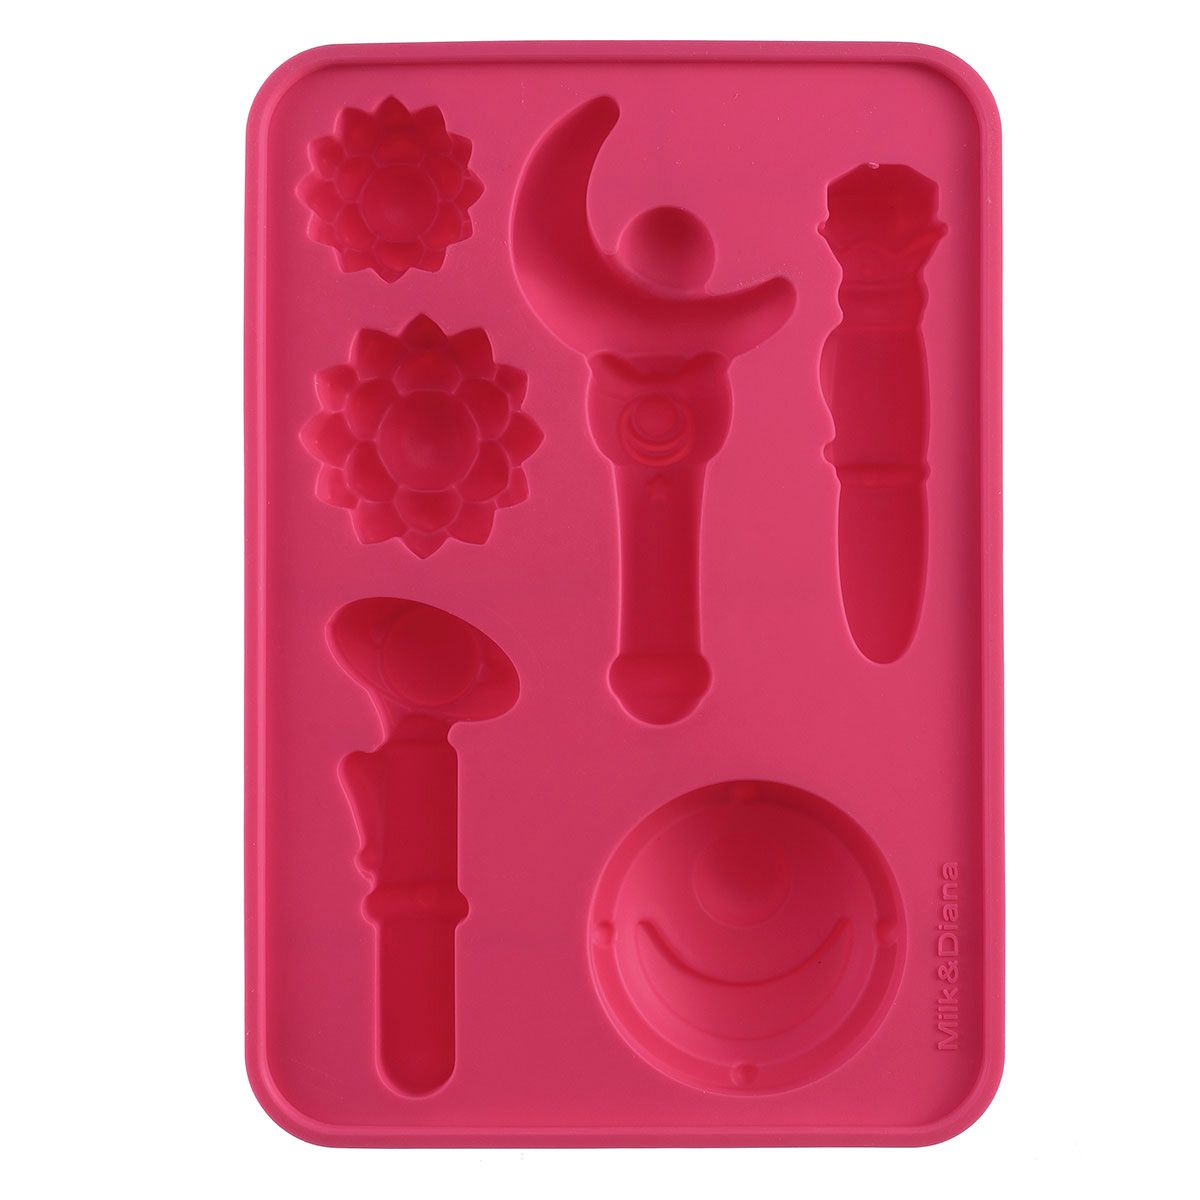 DIY-Silicone-Mold-Chocolate-Ice-Cube-Solid-Mould-Gift-Props-For-3D-Sailor-Moon-1601356